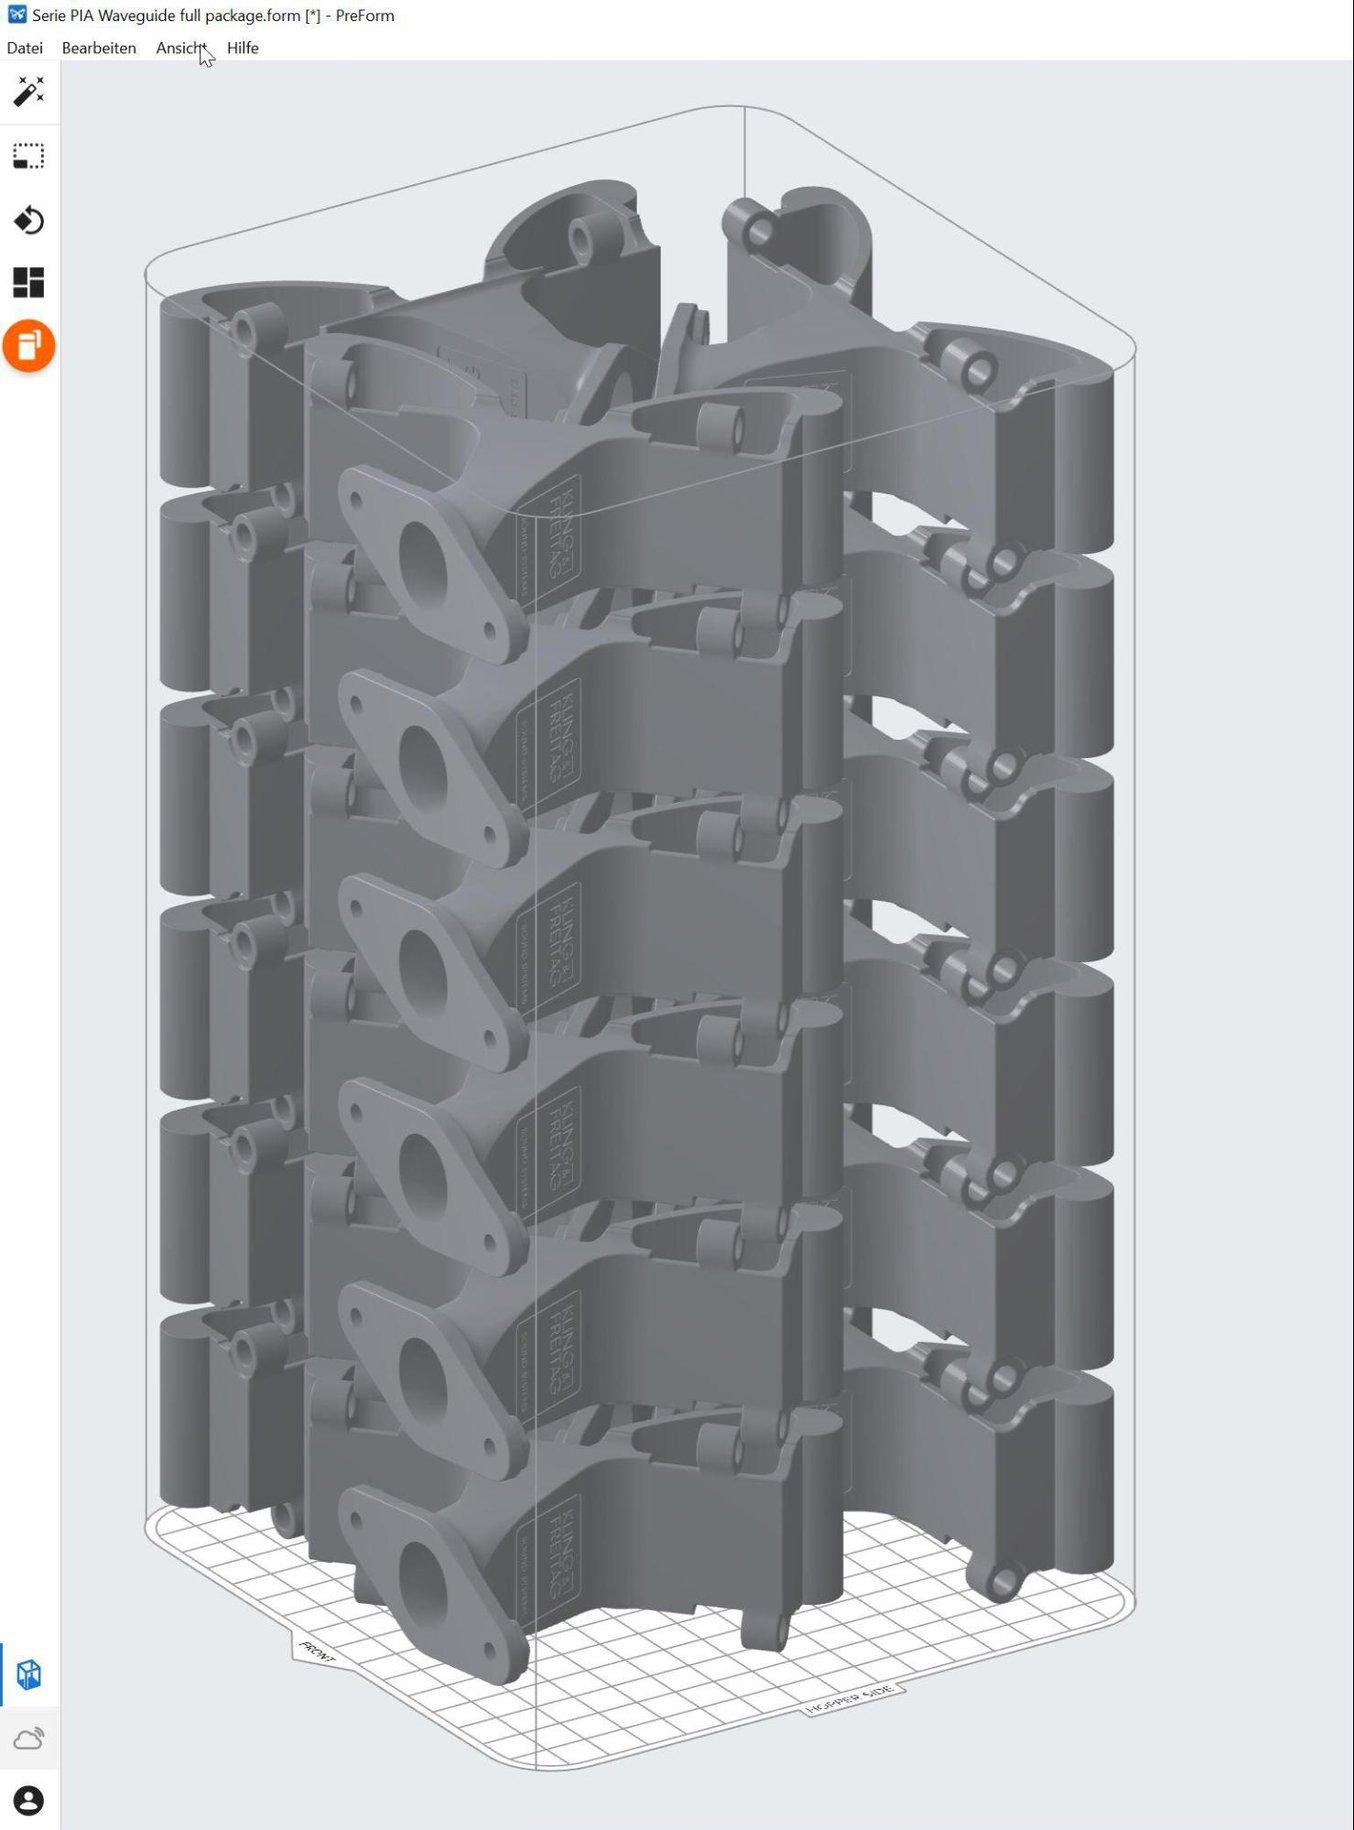 A completely filled build chamber of the Fuse 1 SLS 3D printer, seen in the PreForm software.